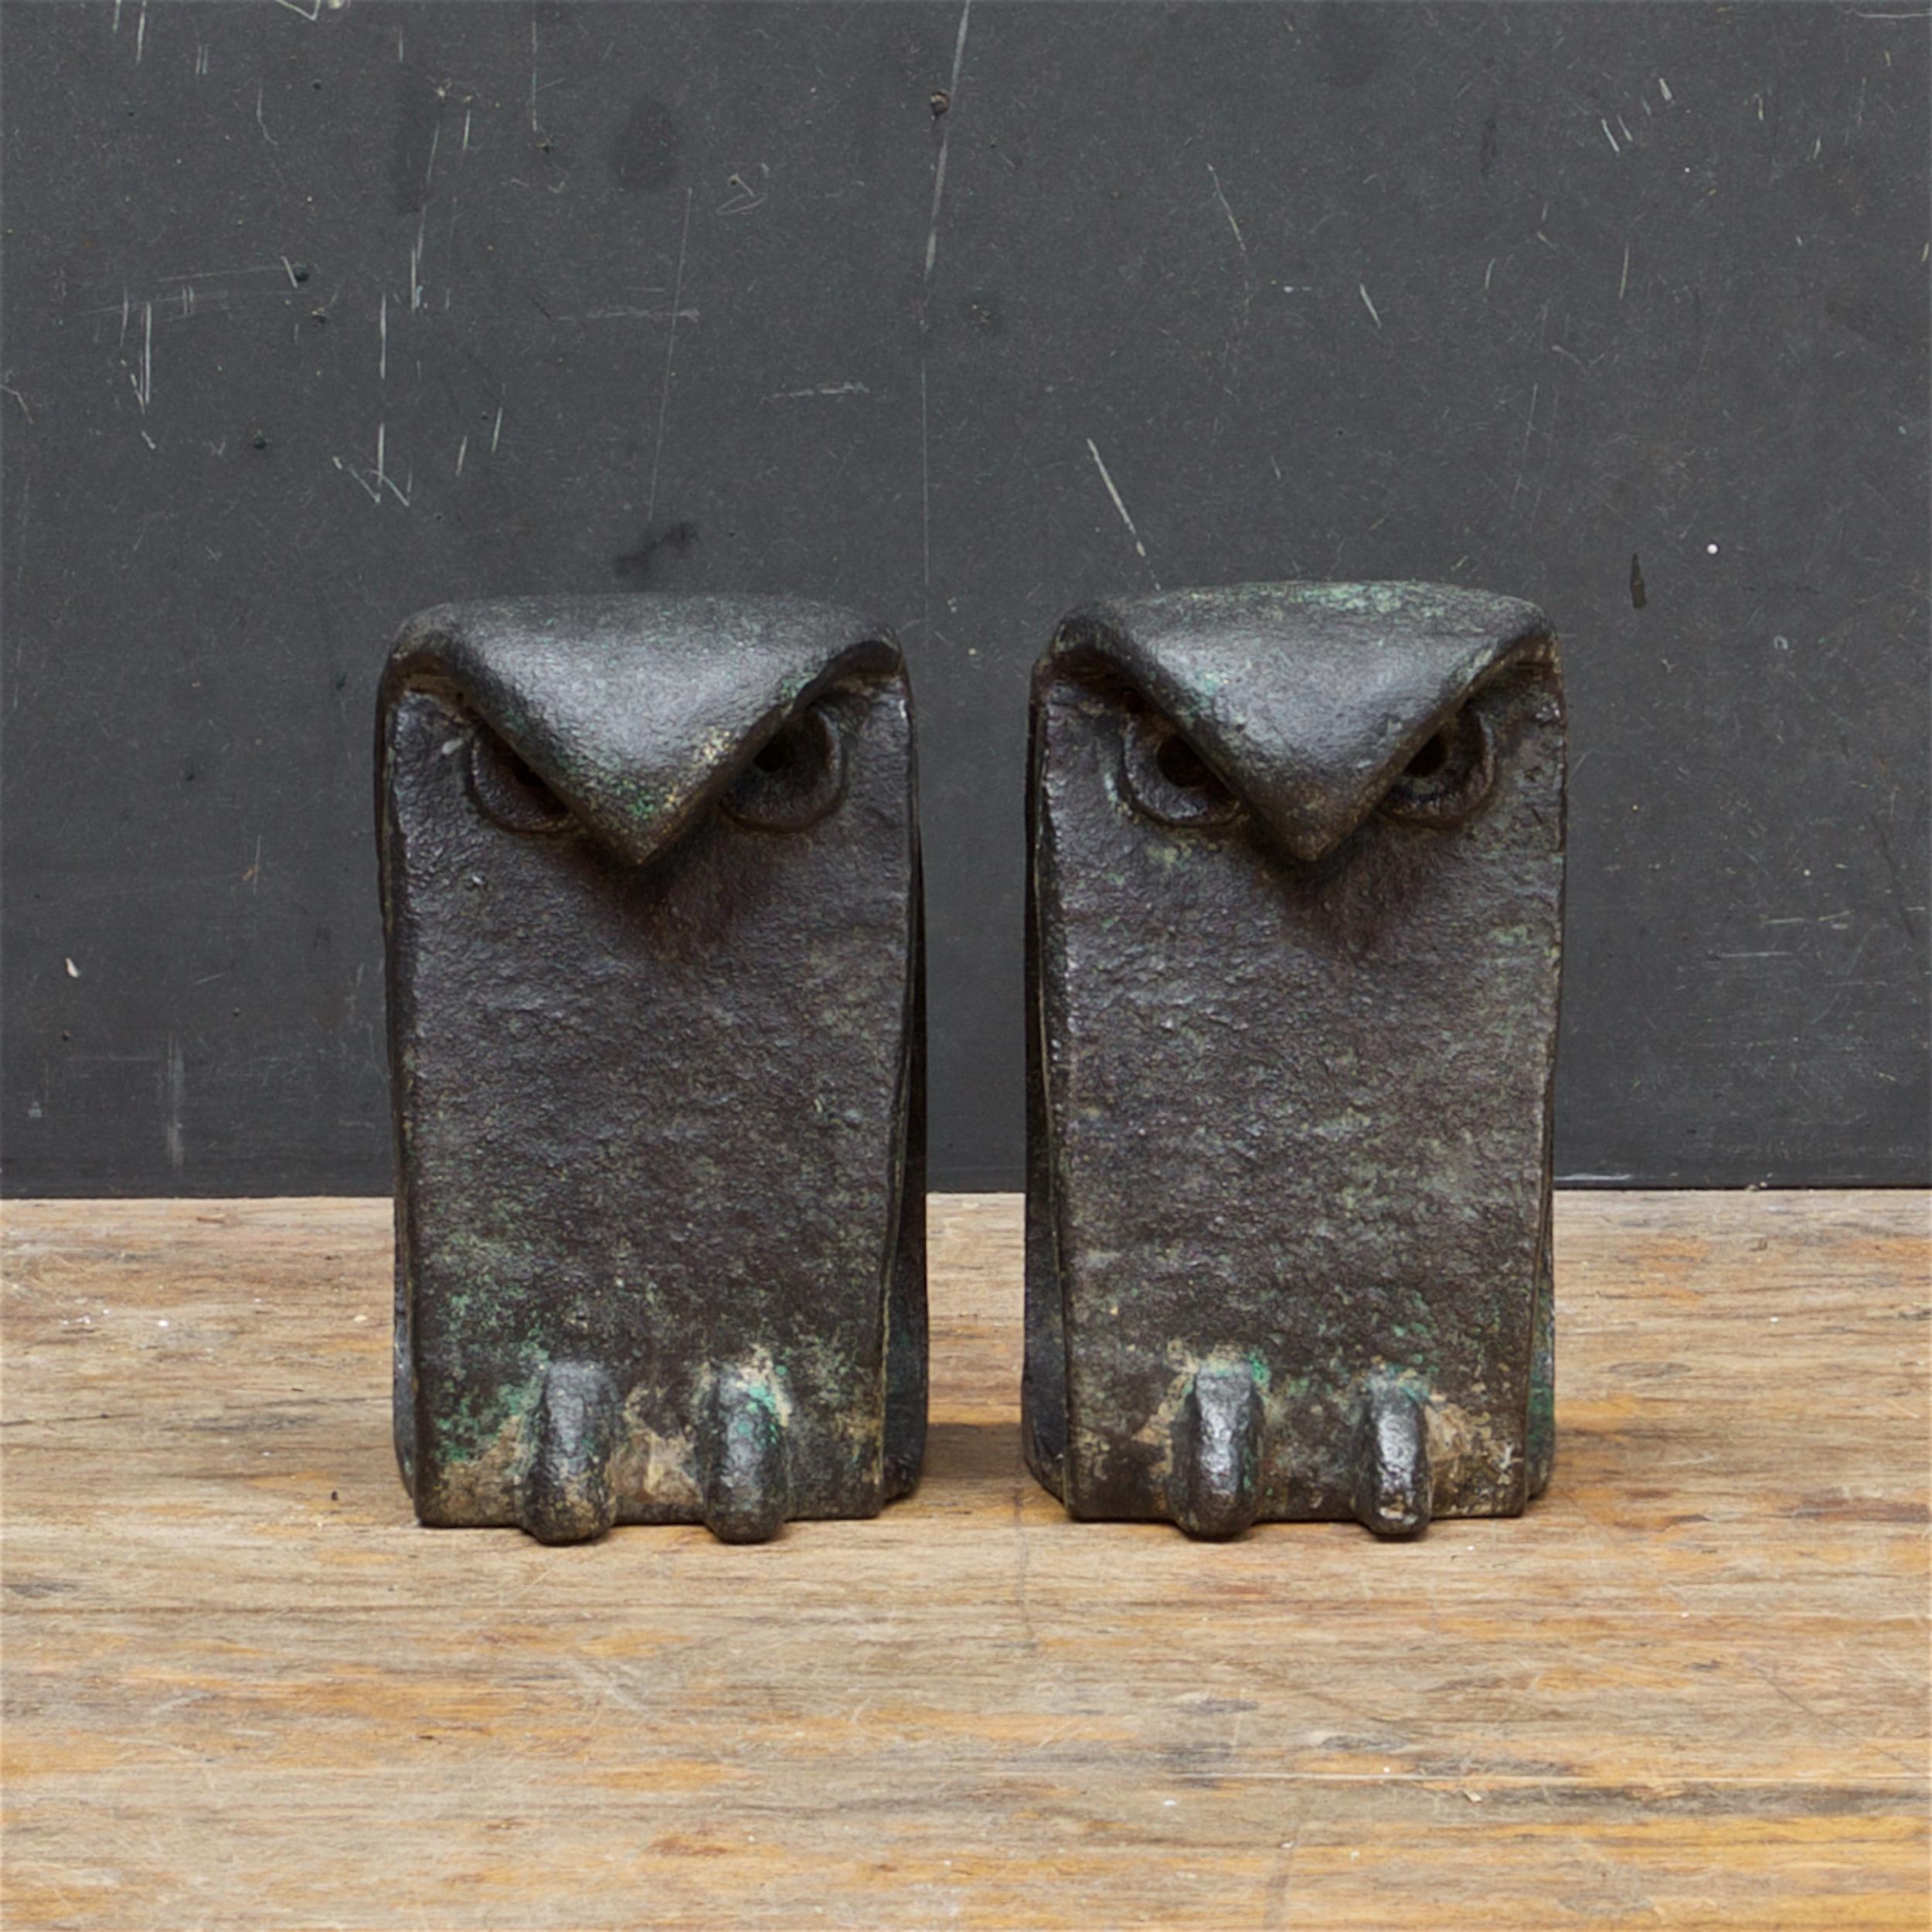 Pair of heavy welded metal abstract bird sculptures. Some remnants of greenish and gold patina on steel. Made in Japan. Cleaned and waxed. 

Each bird is 6 inches High and weighs 3.35 lbs.